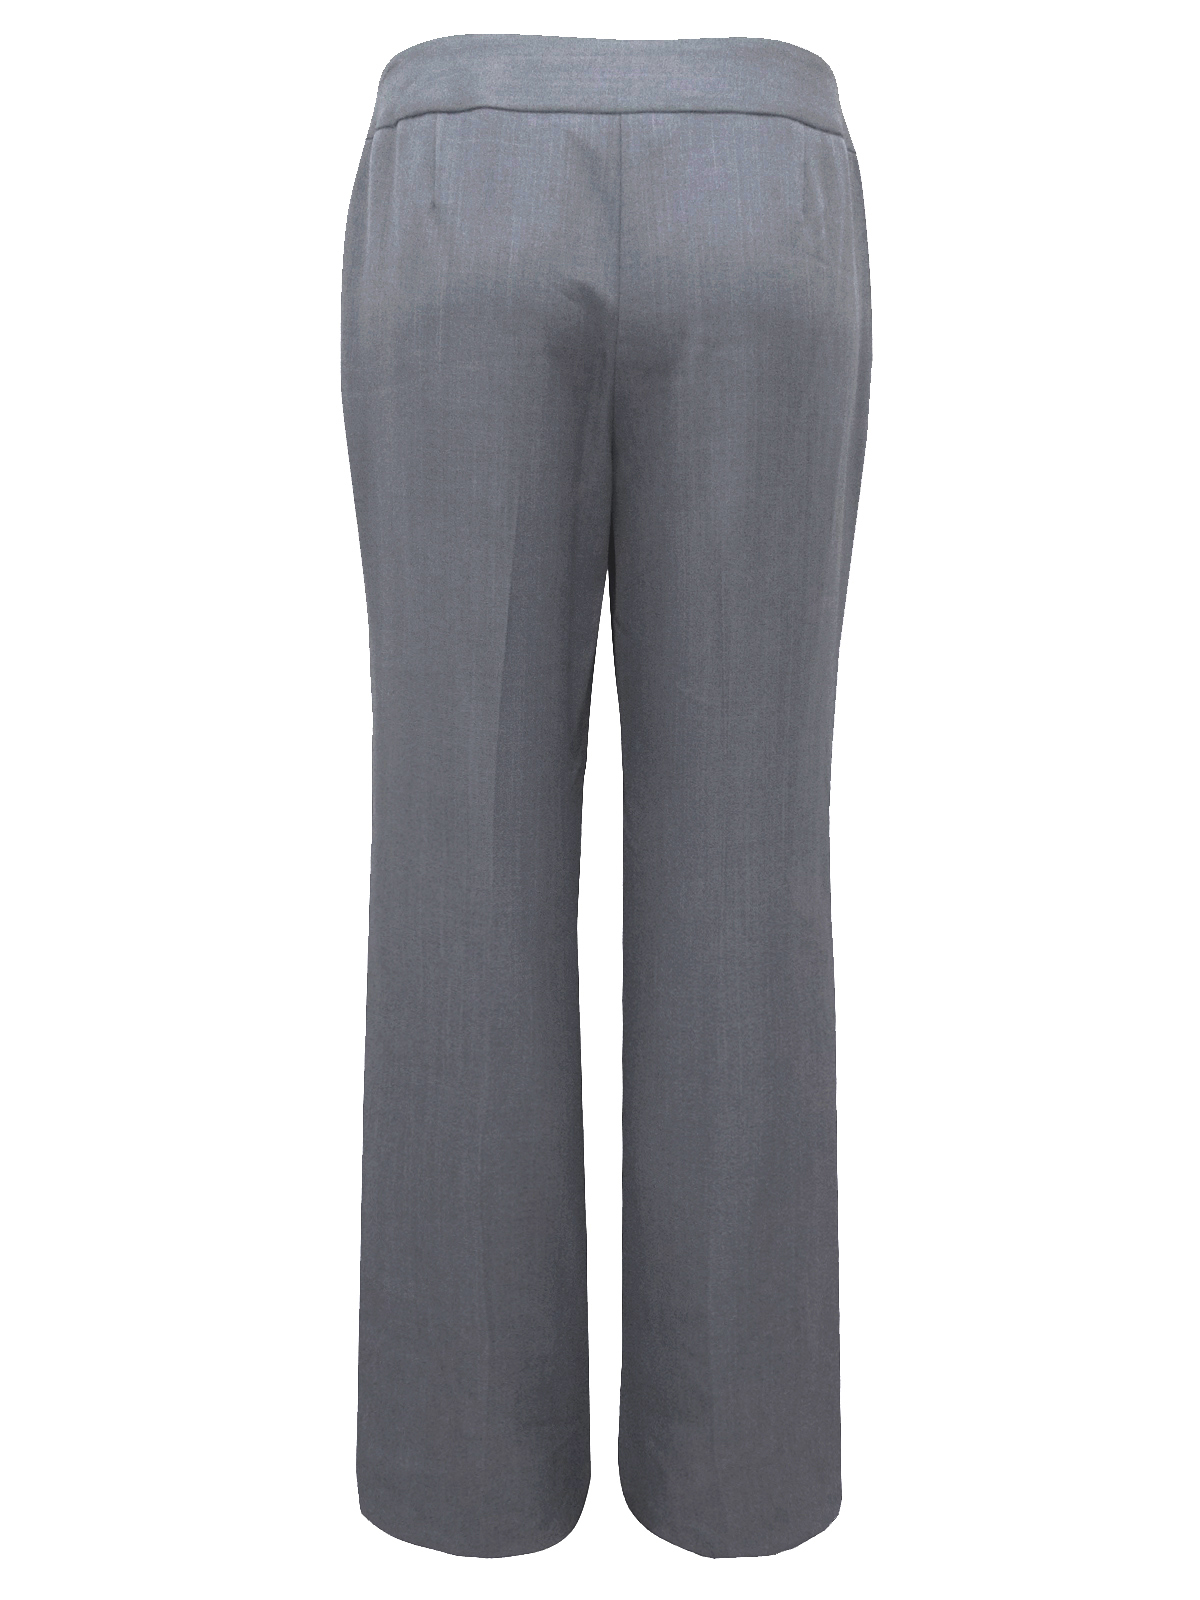 Marks and Spencer - - M&5 GREY Stitch Waistband Straight Leg Trousers ...